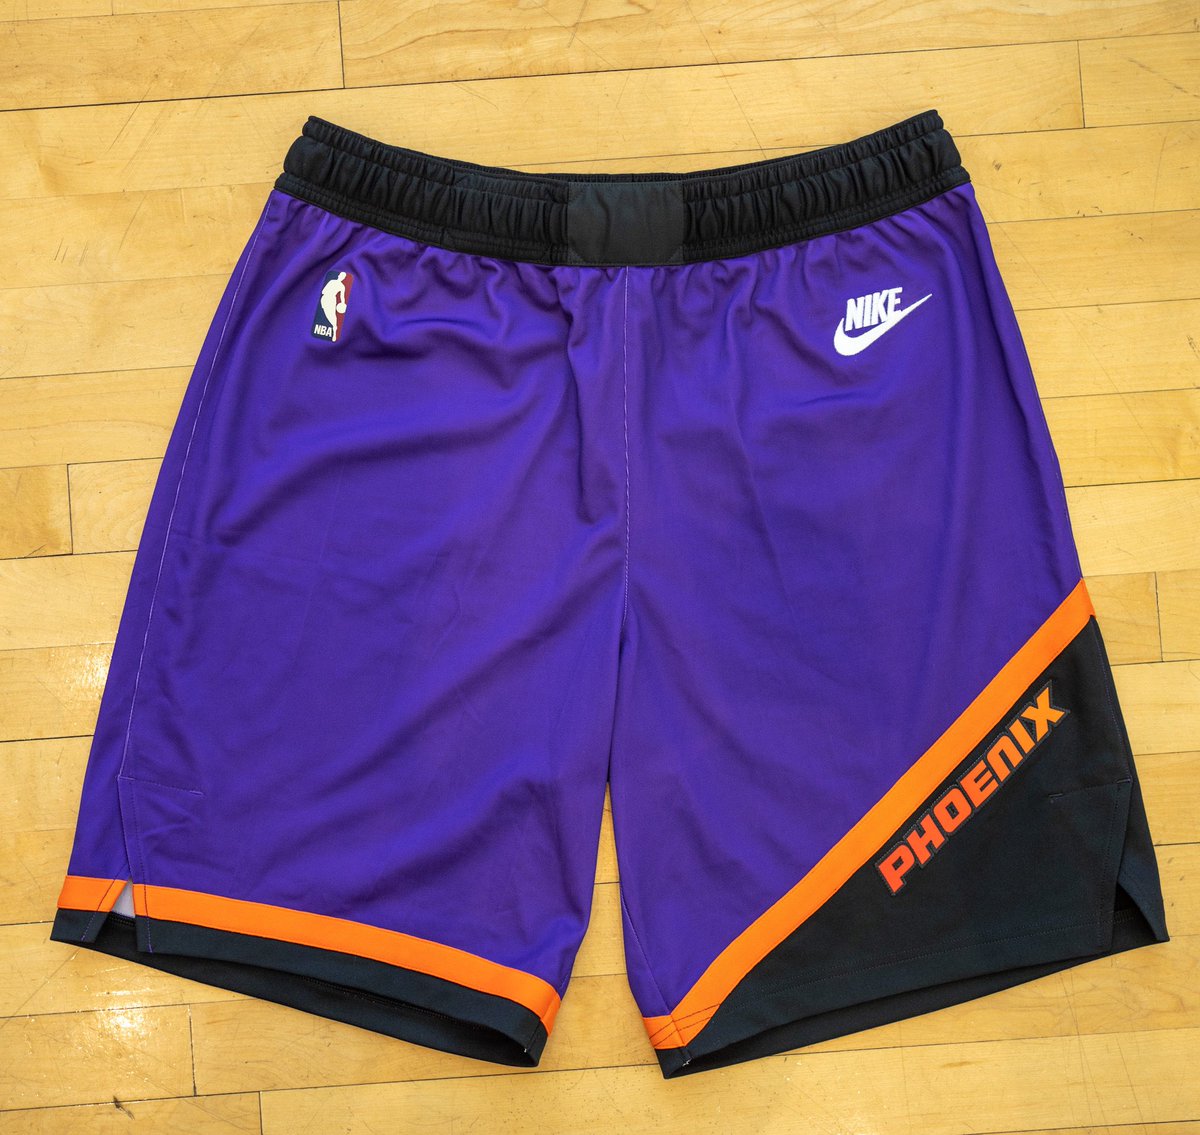 Nick DePaula on X: The Phoenix Suns are bringing back their iconic  “Sunburst” jerseys in purple this season. 🔥🔥 The new Classic Edition  uniform celebrates the 30th anniversary of the team's 1992-93